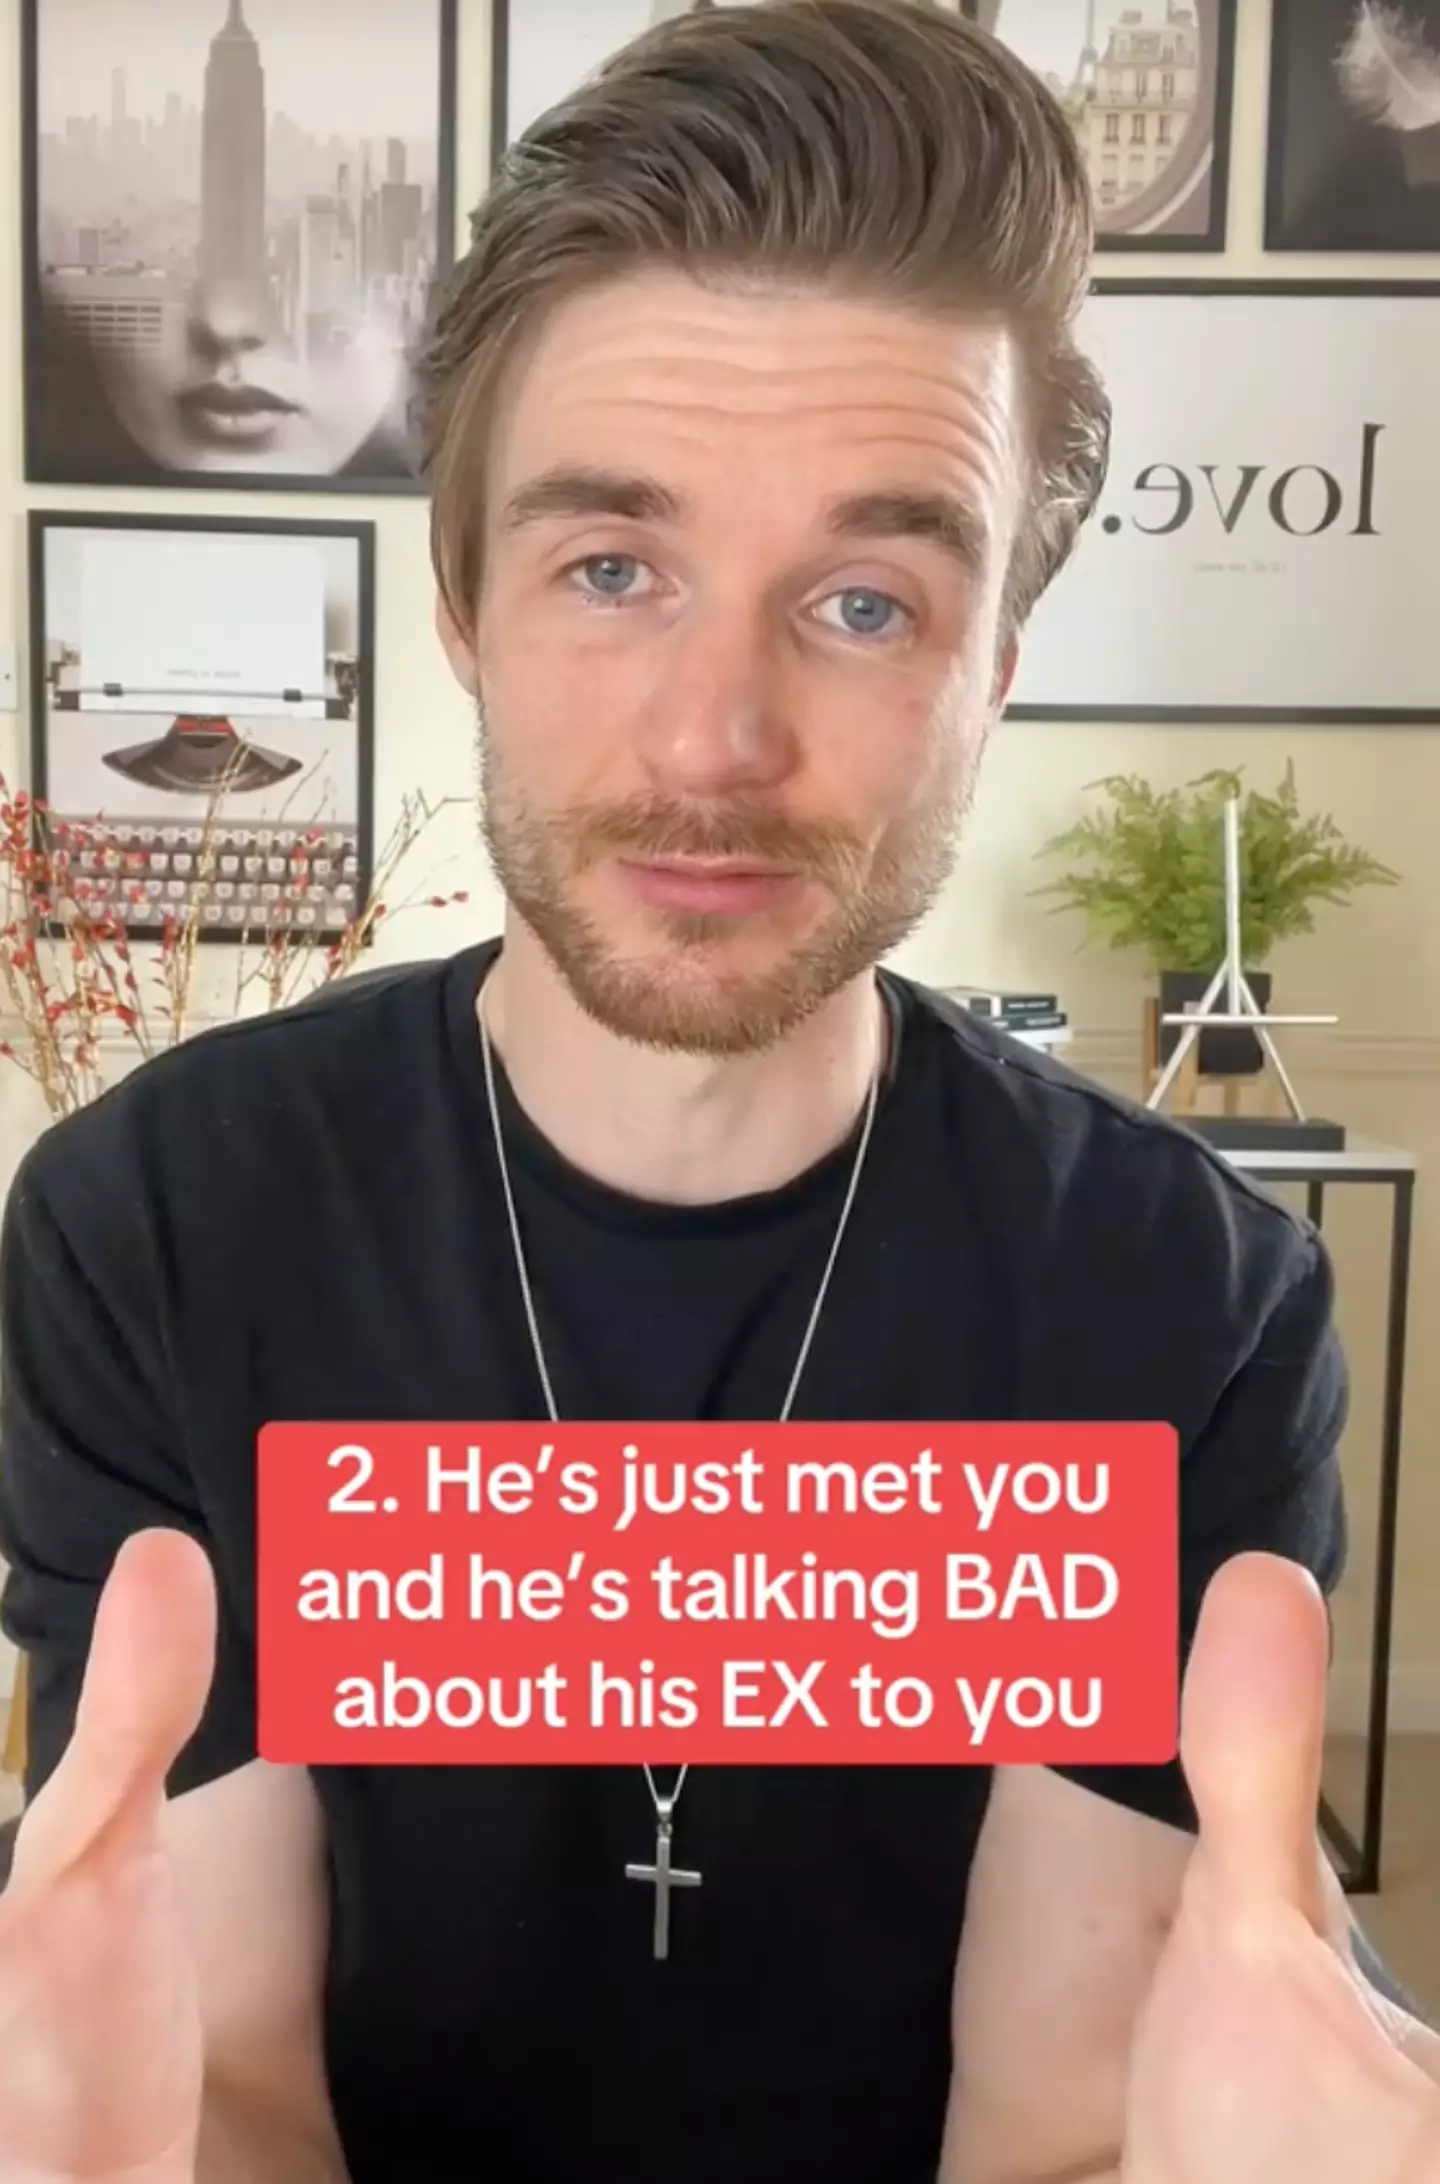 It's a big no-no if they start talking negatively about an ex after just meeting you.